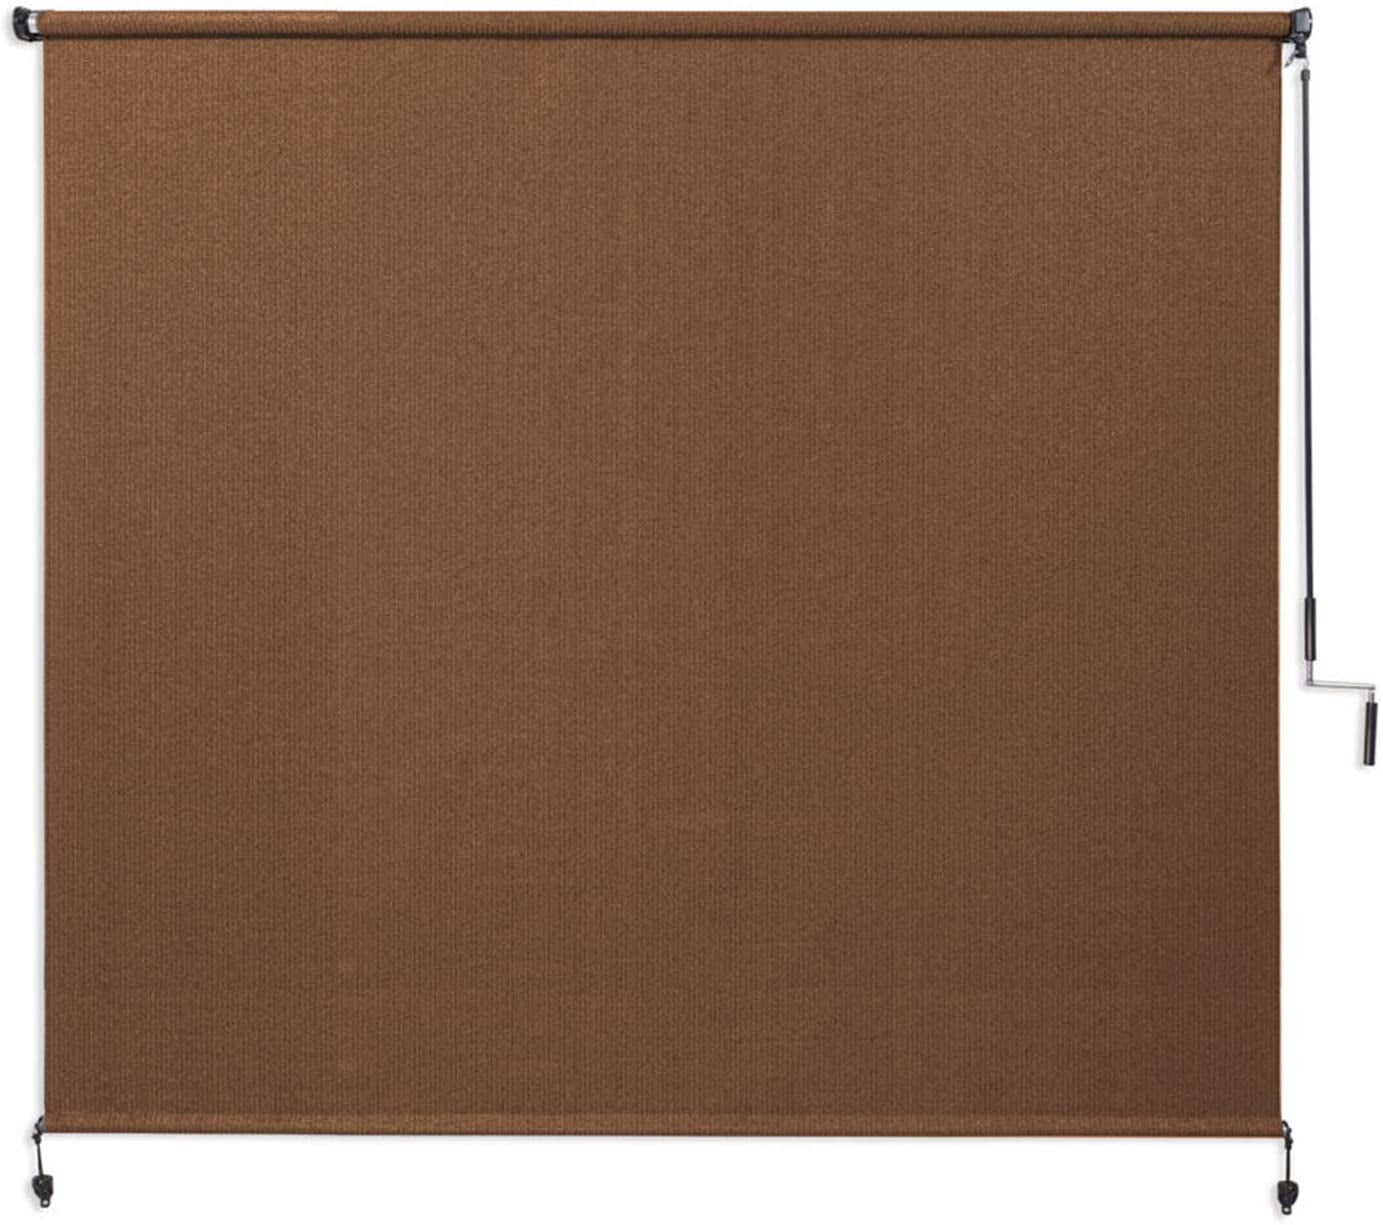 Coolaroo Select Exterior Outdoor Cordless Roller Shade 4ft X 6 Feet Mocha for sale online 